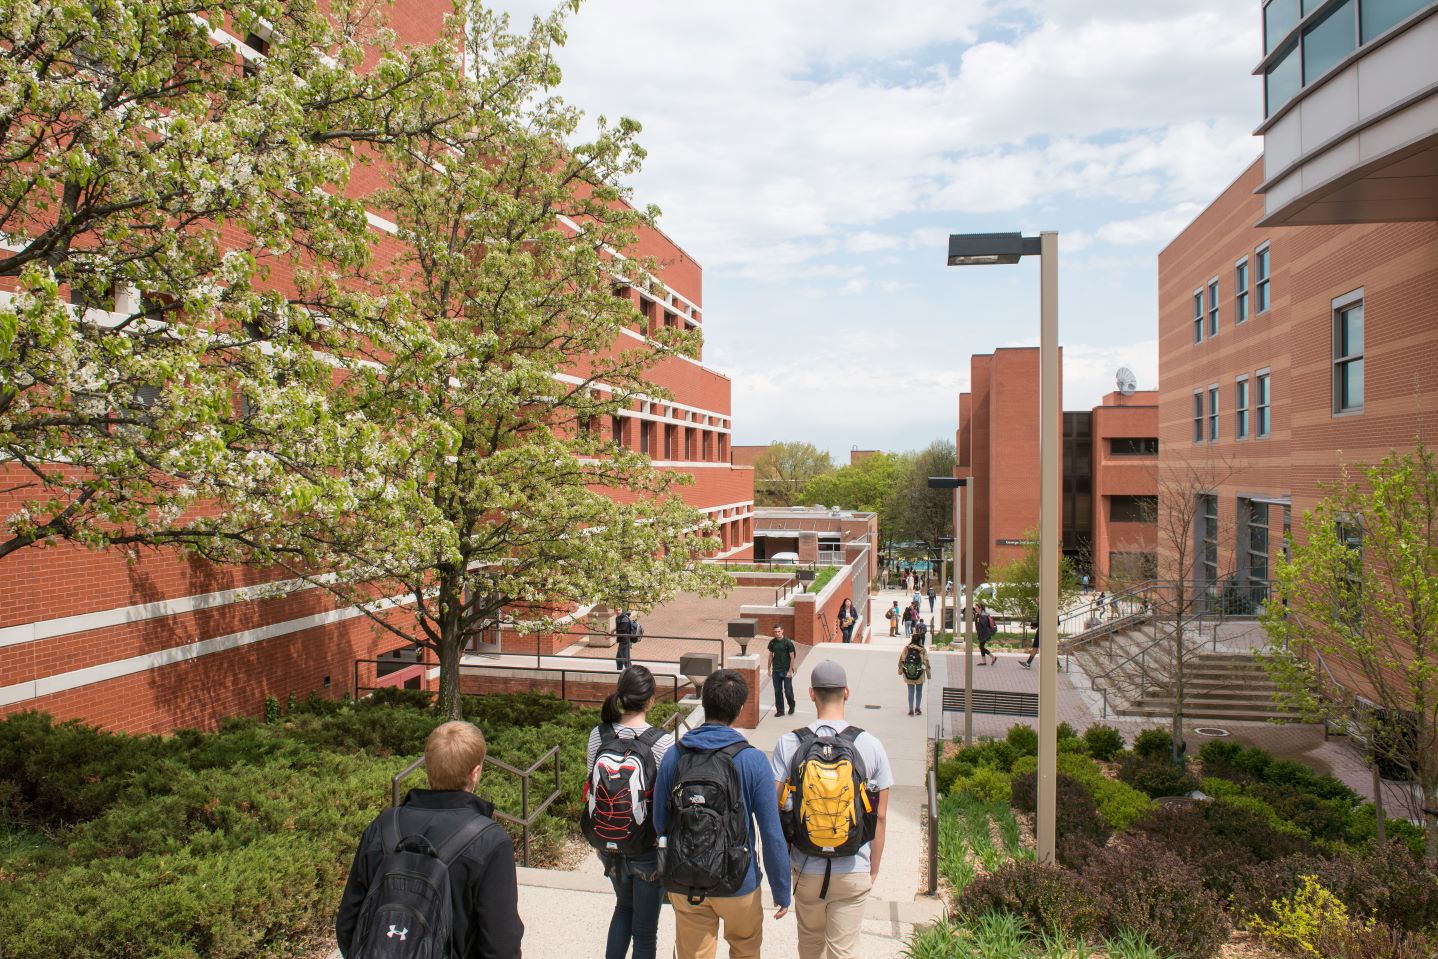 UMBC awarded $1 million in grants from the Jack Kent Cooke Foundation to support promising STEM students with financial need